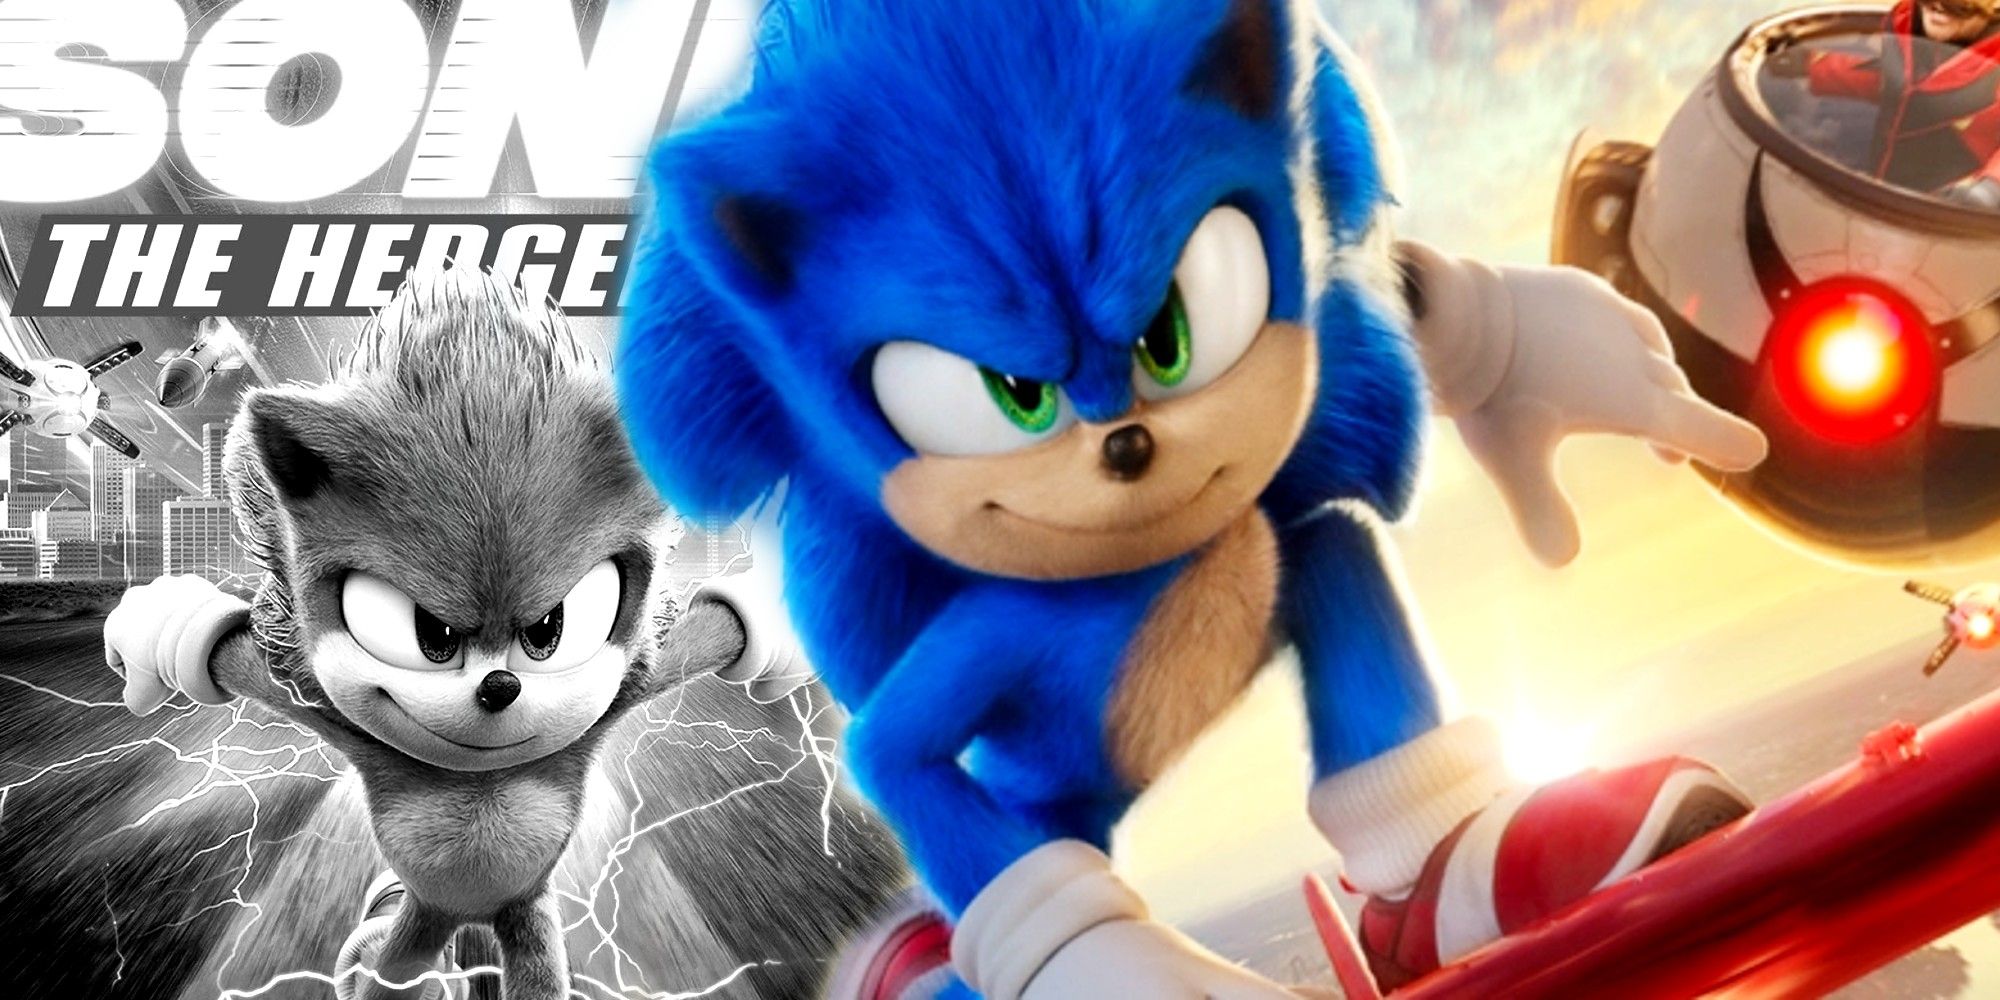 Hedgehog 2 the sonic Sonic the